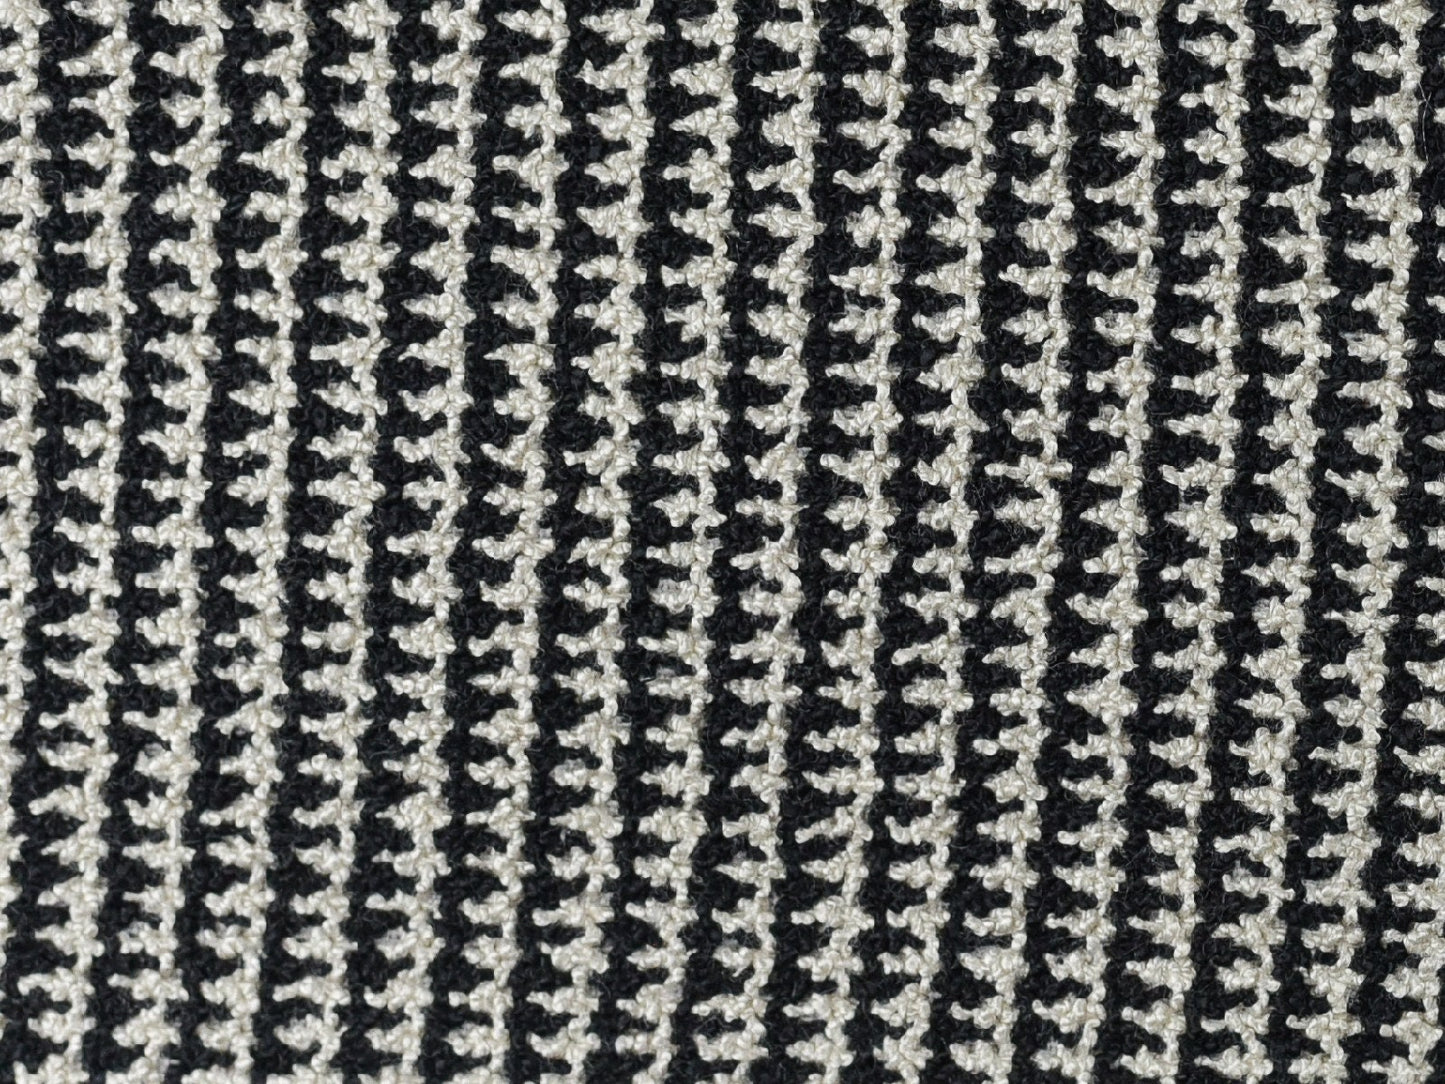 Black And White Boucle Houndstooth Wool Like Fancy Jacquard Upholstery Fabric By The Yard 55"W/660GSM